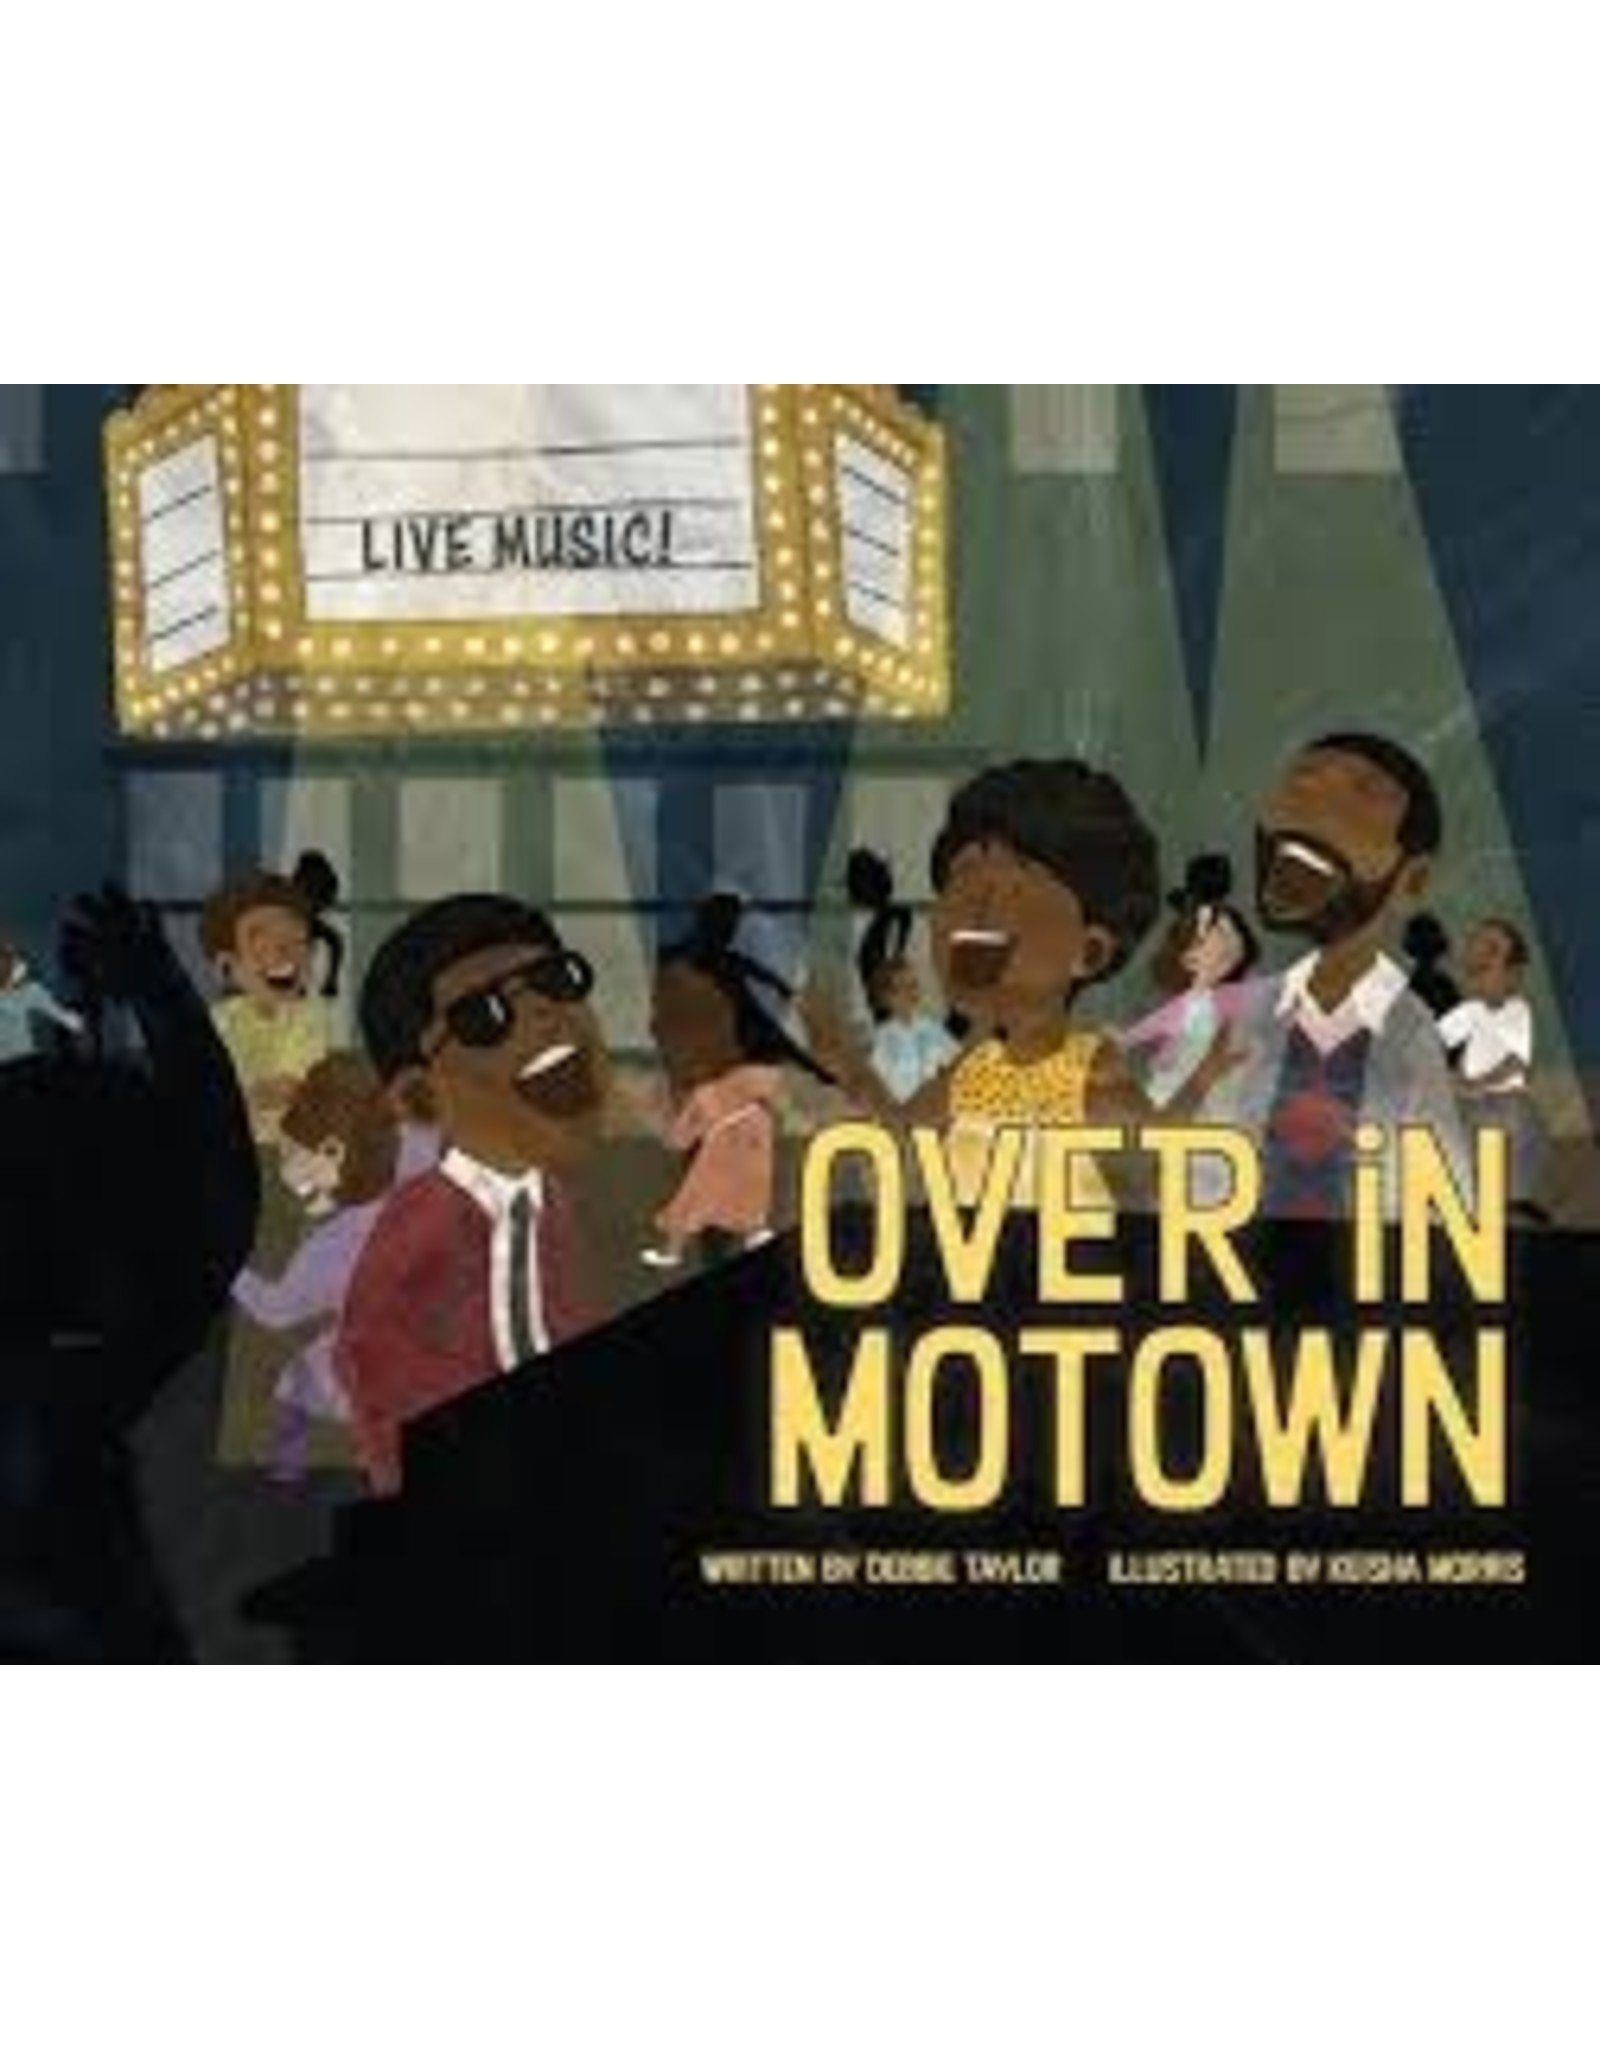 Books Over in Motown by Debbie Taylor Illistrated by Keisha Morris